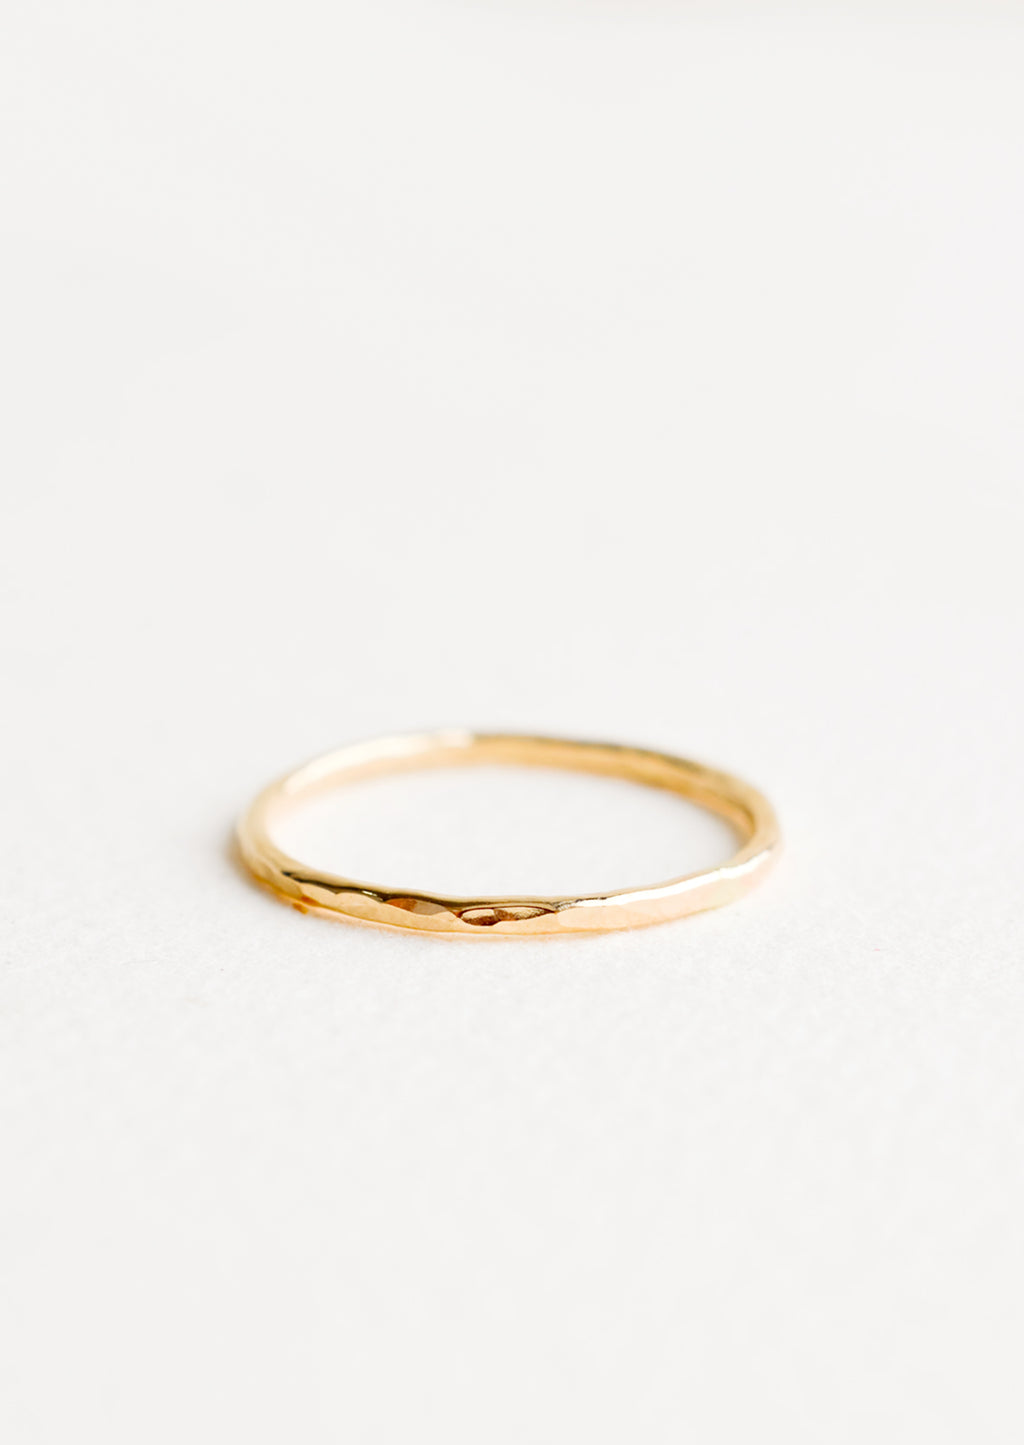 1: Thin hammered gold ring. 